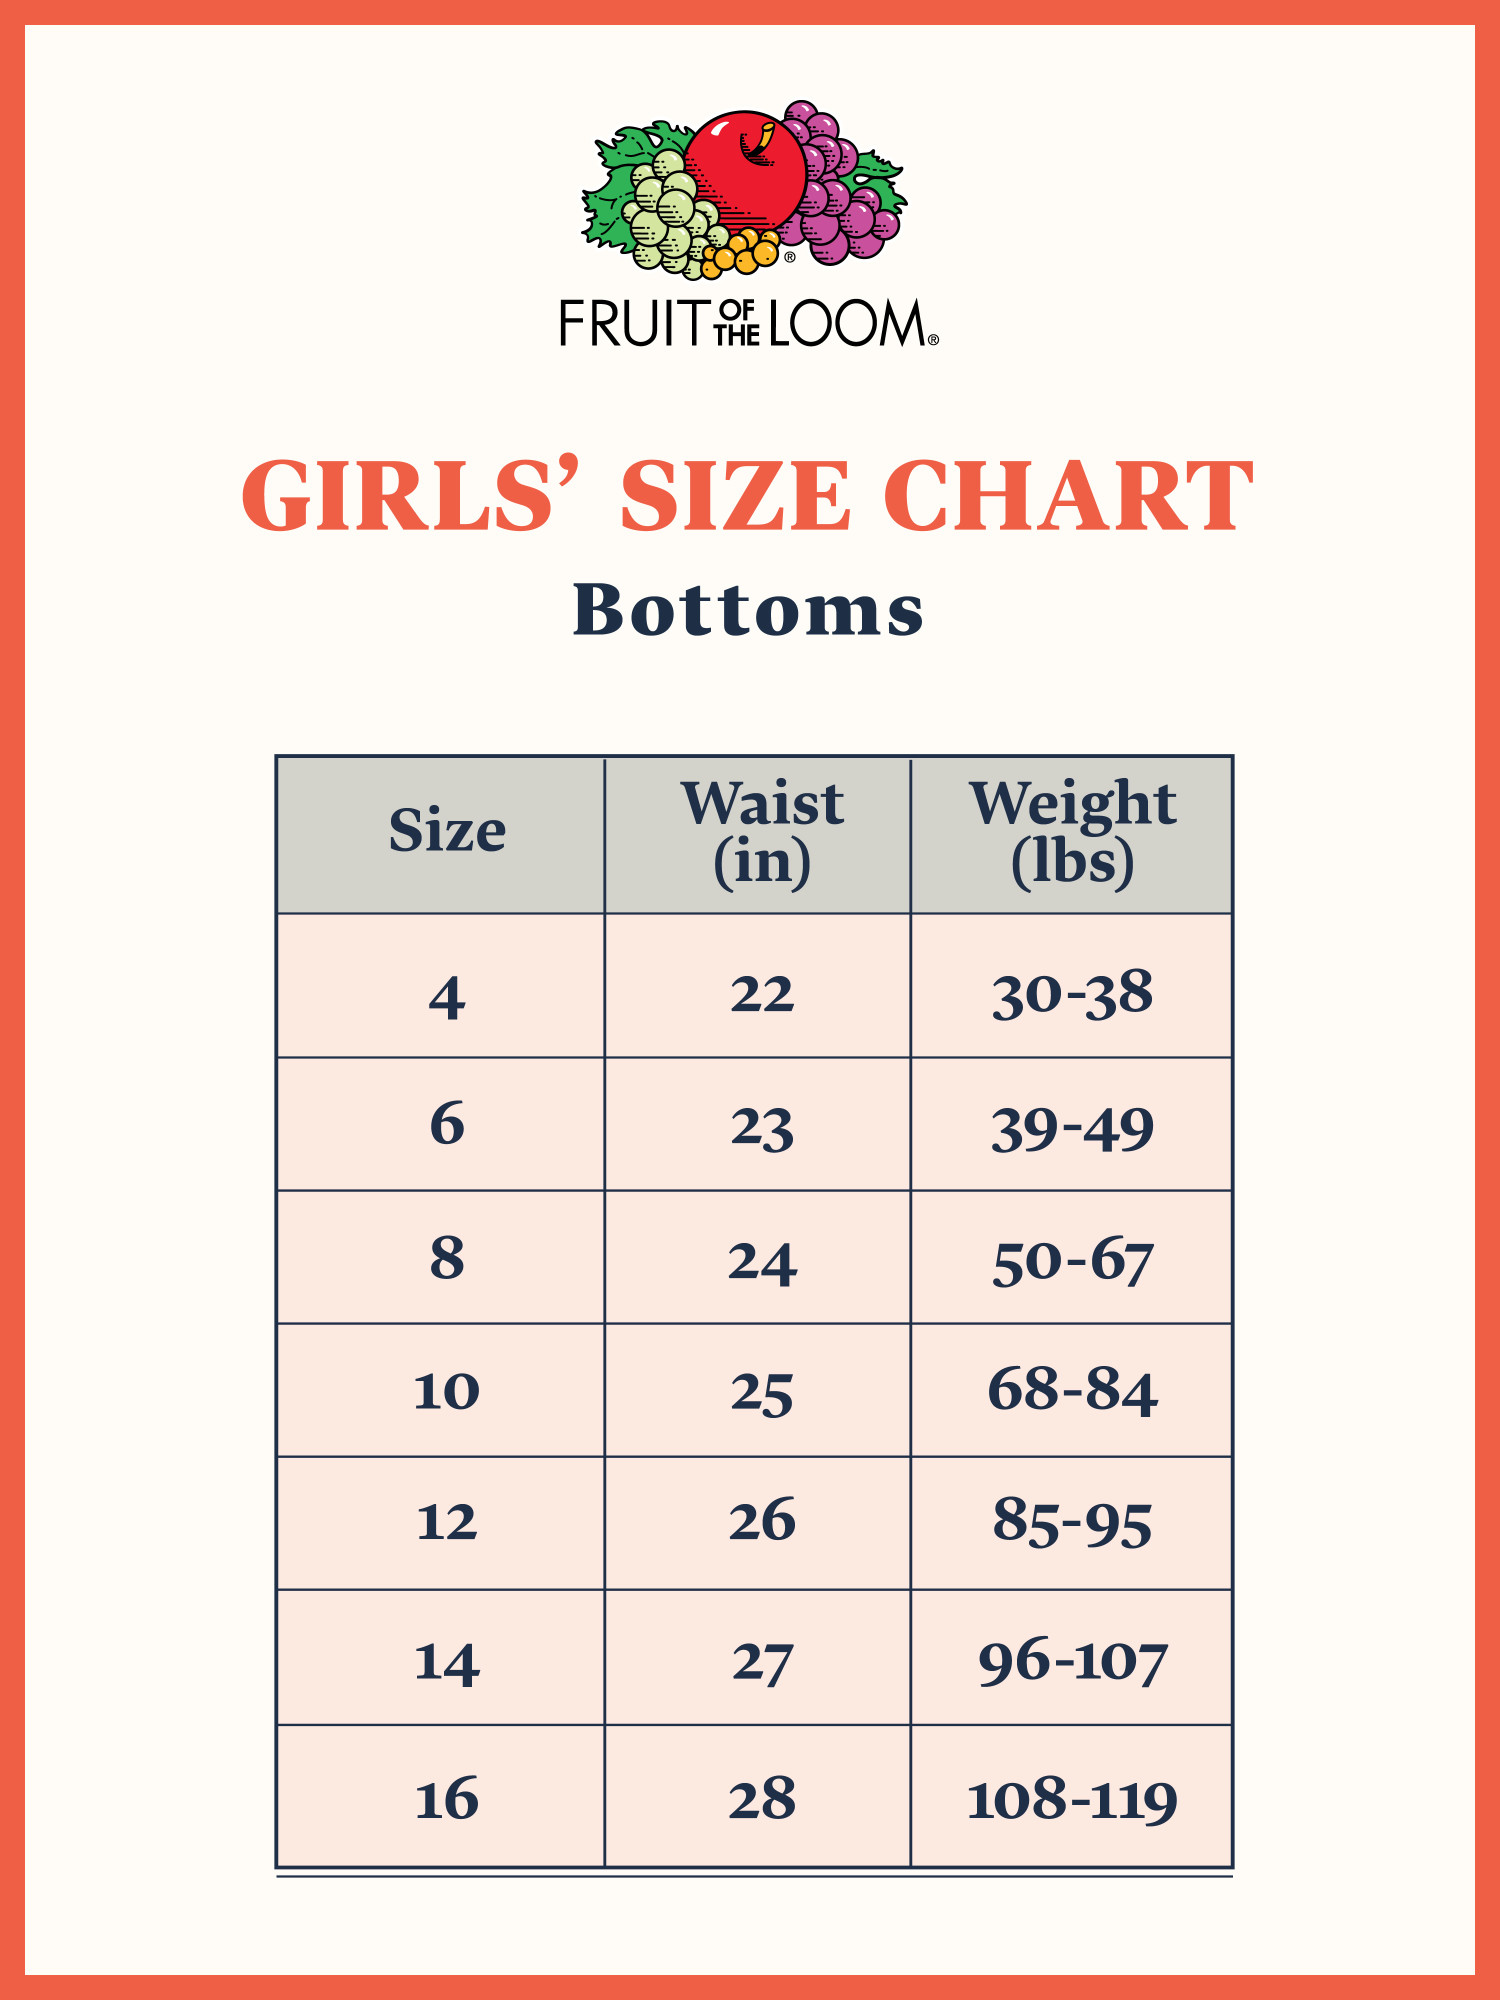 Fruit of the Loom Girls' Assorted Cotton Hipster Underwear, 14 Pack Panties Sizes 4 - 14 - image 3 of 4